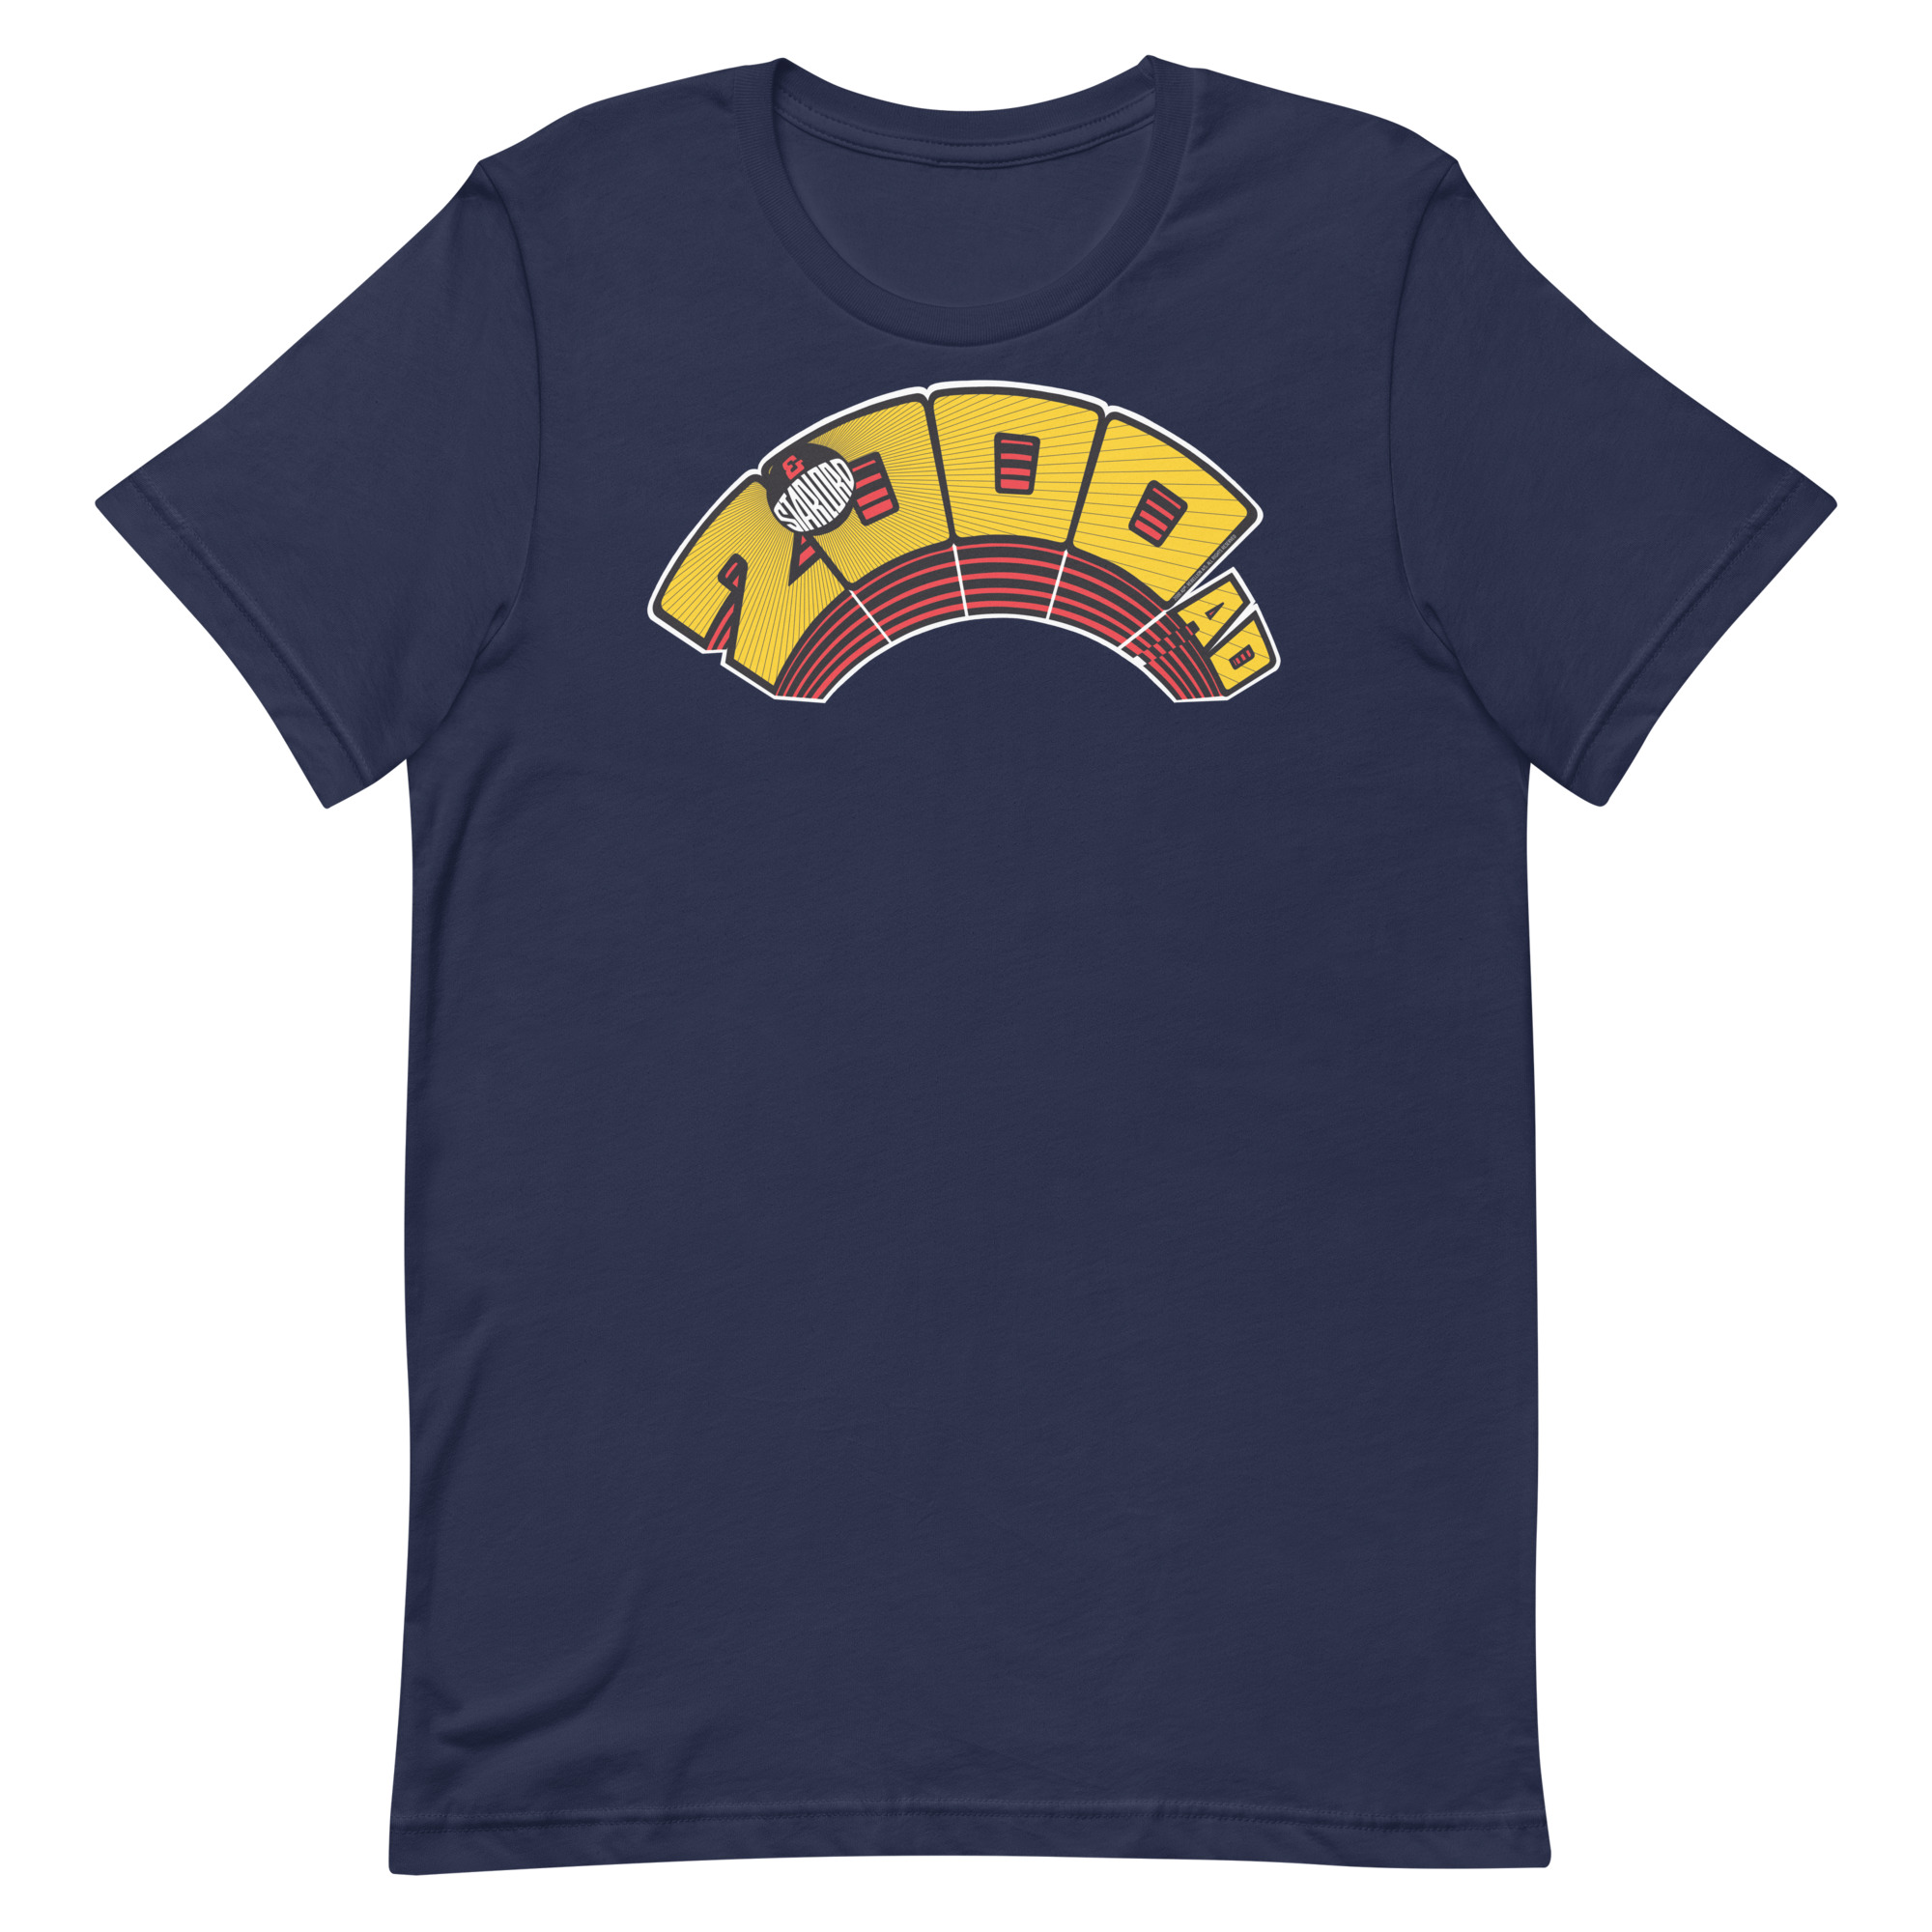 Image of a Navy coloured 2000AD Starlord Arch t-shirt featuring a large 2000AD Starlord Arch logo in the middle